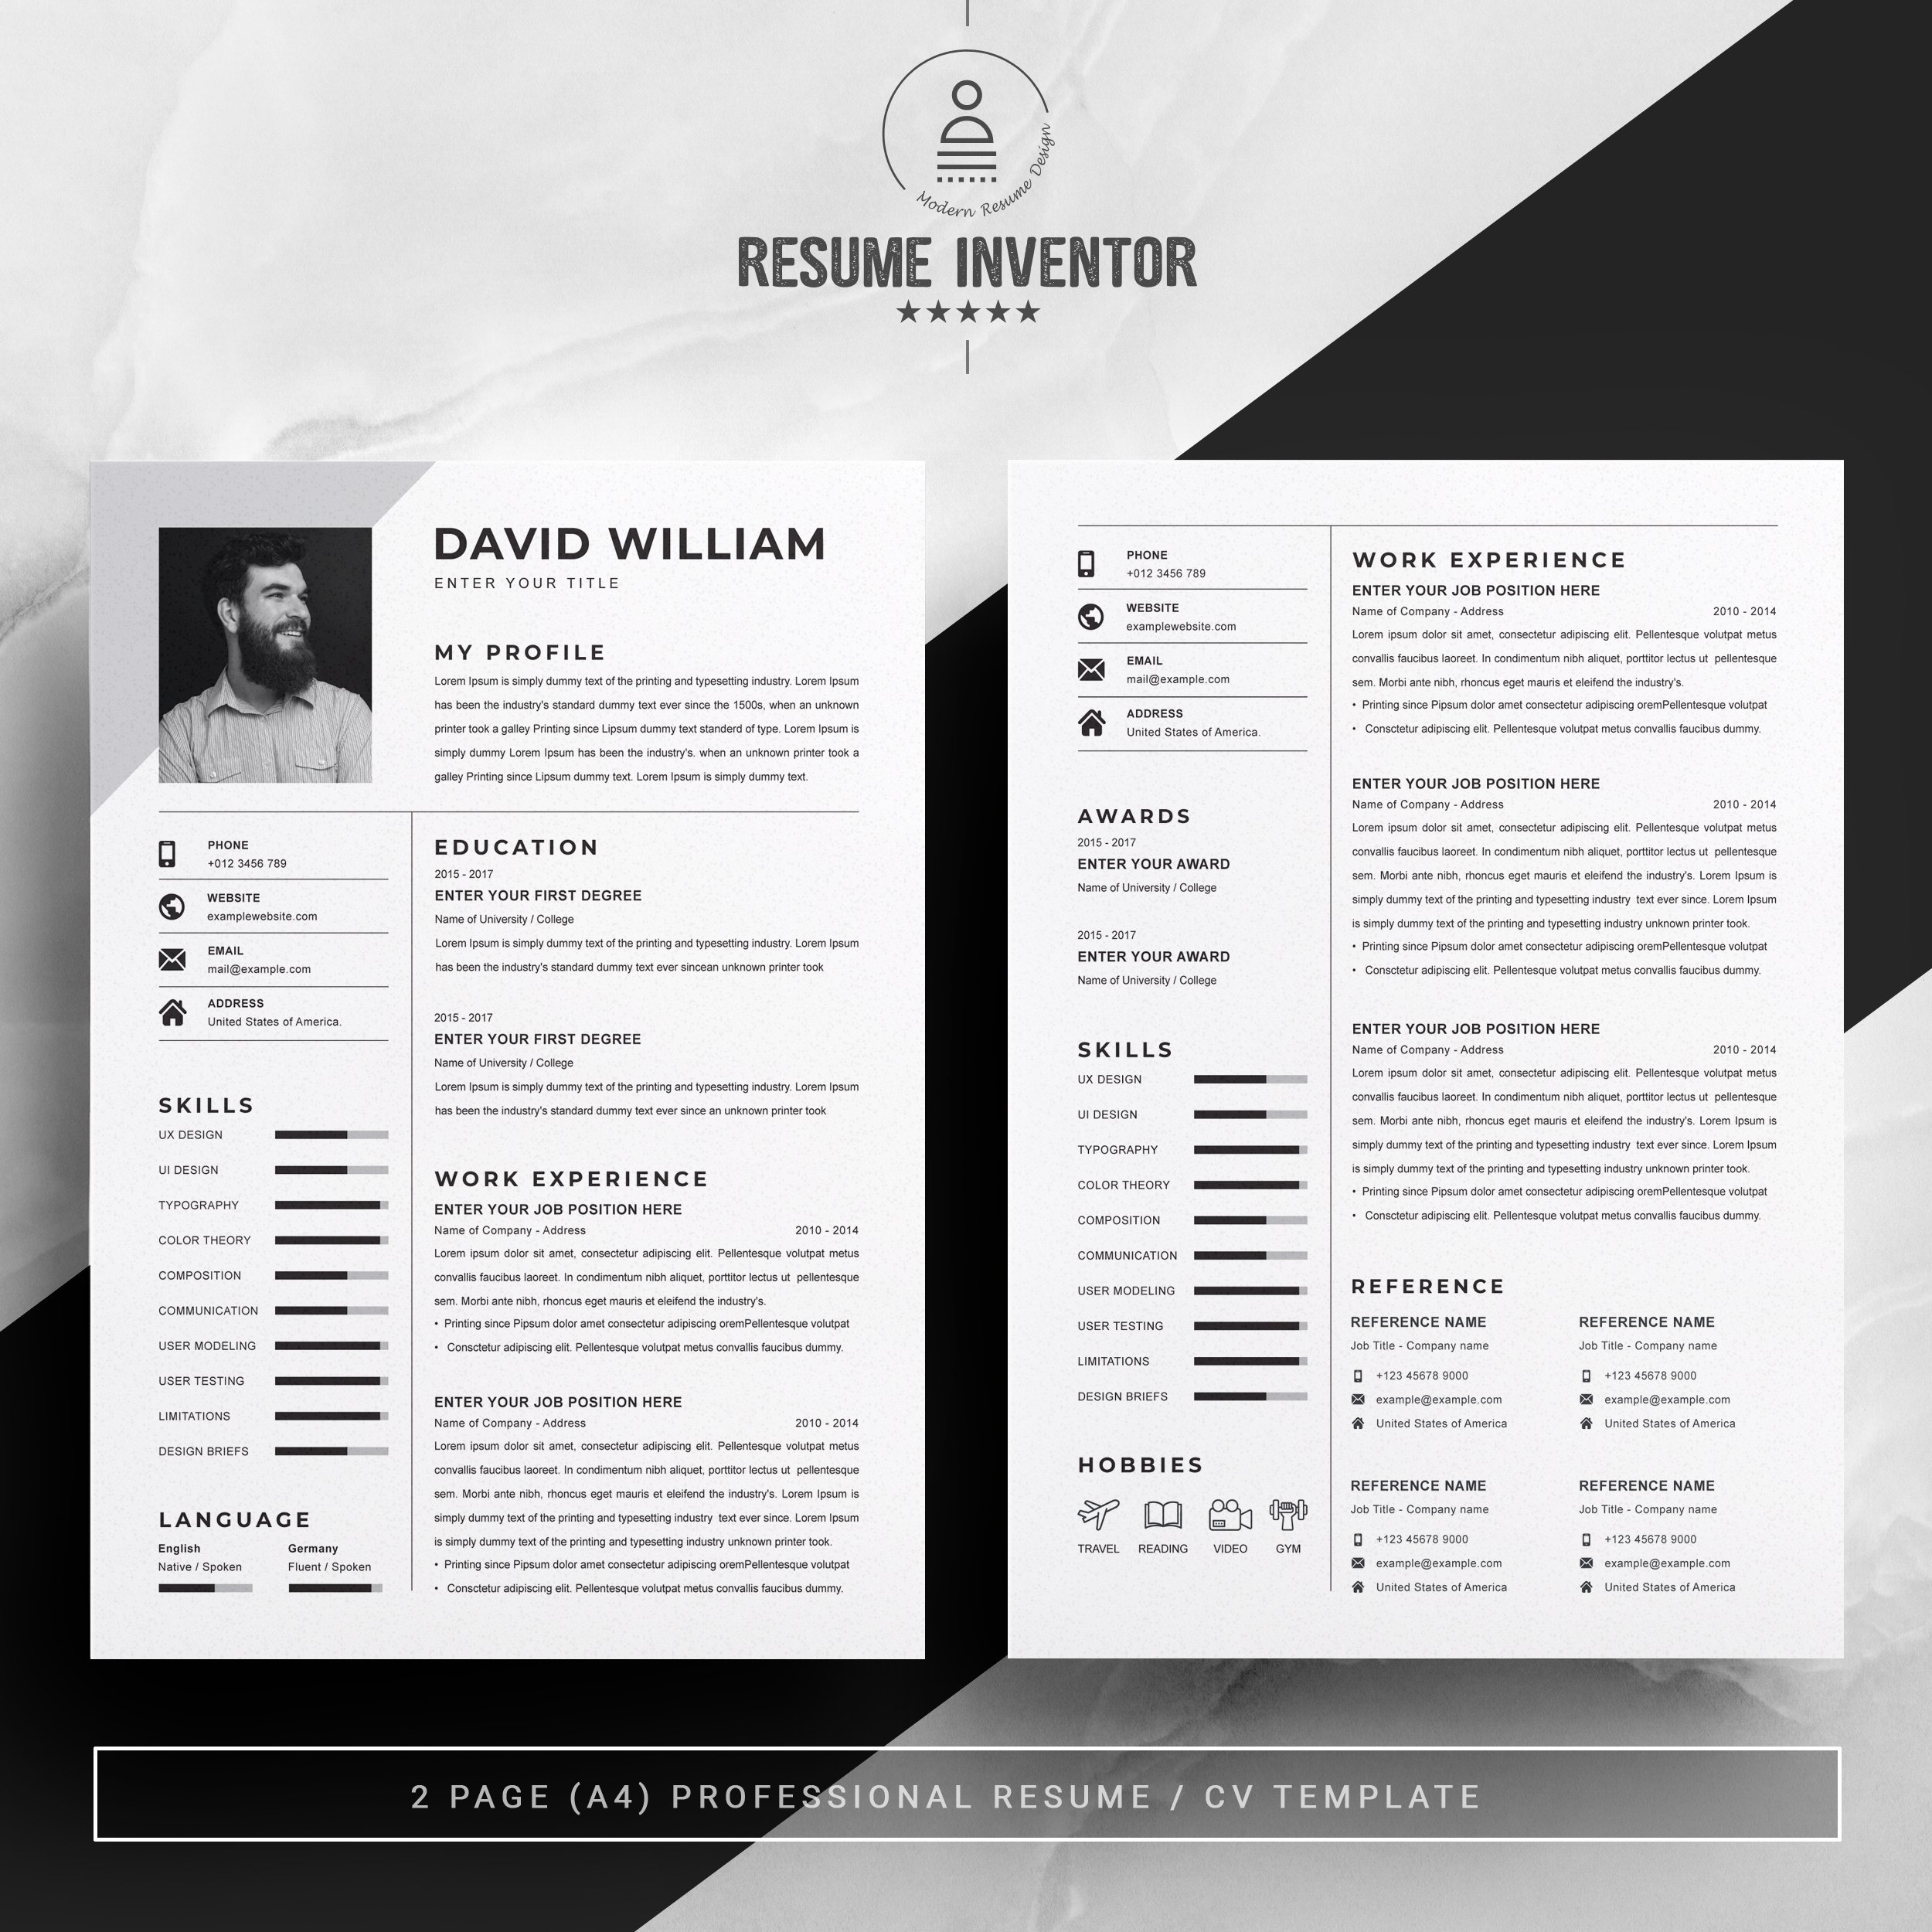 Top Resume Word Format CV preview image.